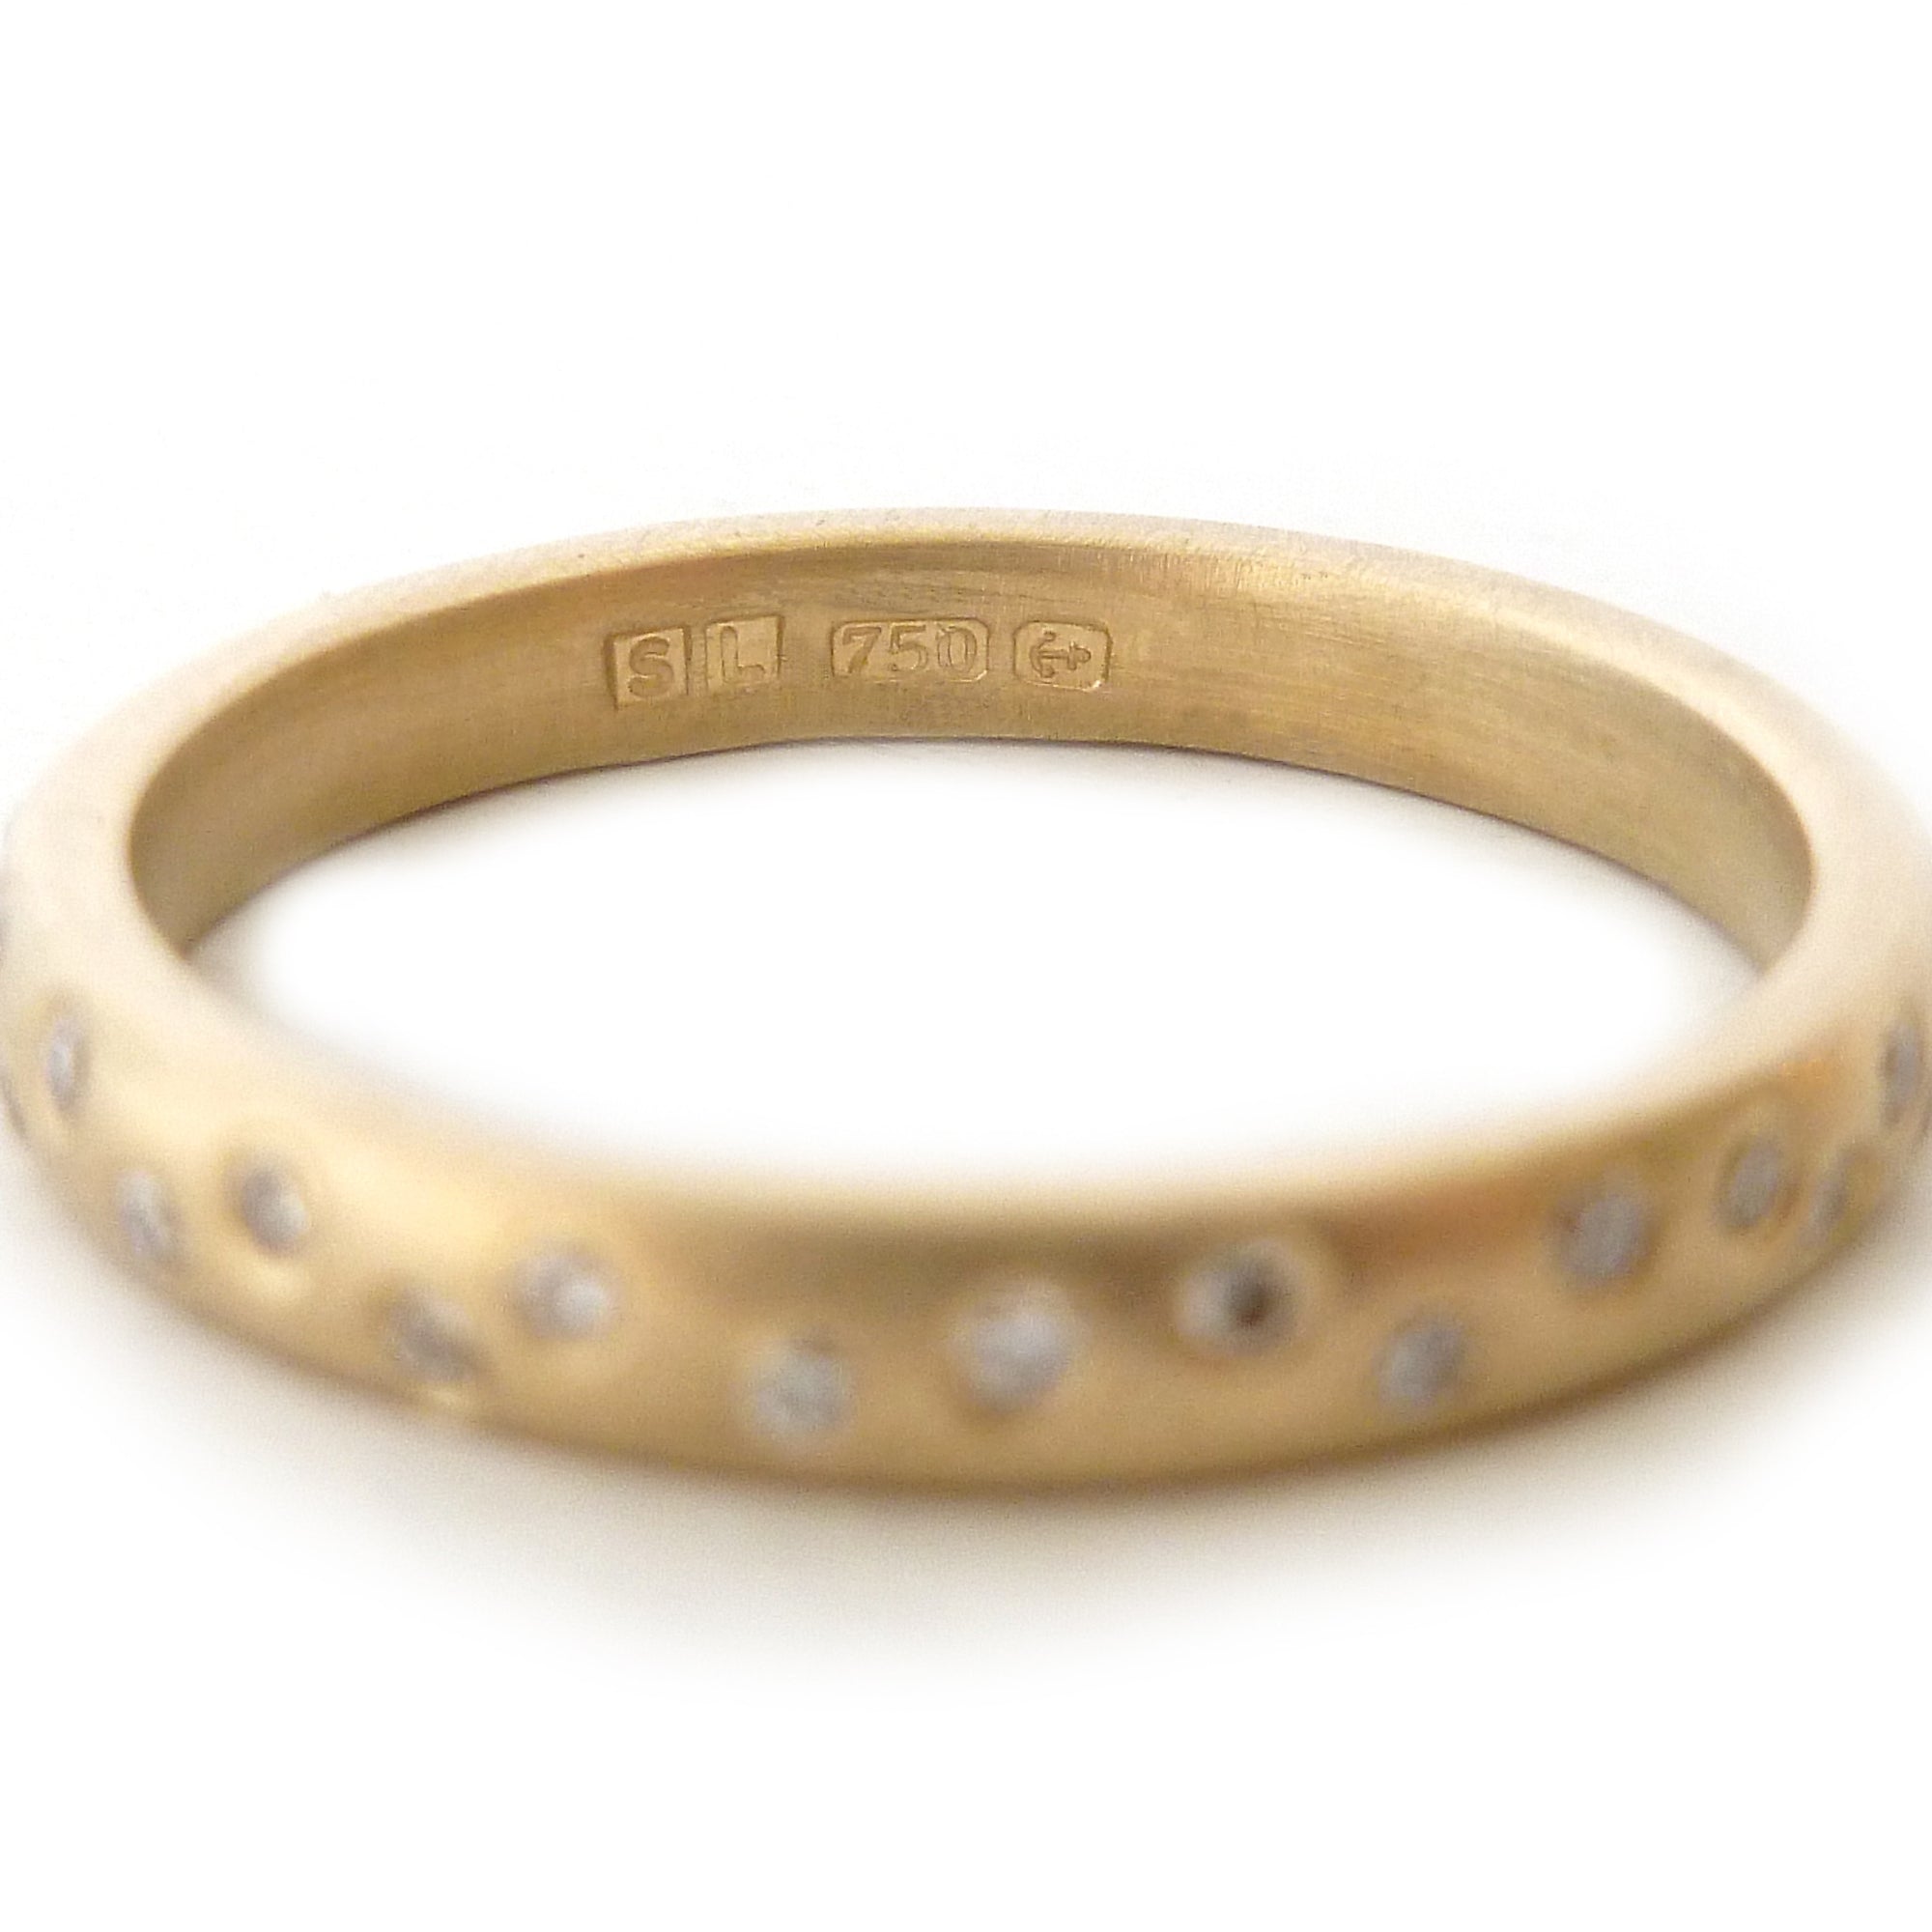 Modern, contemporary and unique handmade gold 12 diamond eternity ring, wedding ring, or engagement ring by Sue Lane Contemporary Jewellery, UK. Made to order.